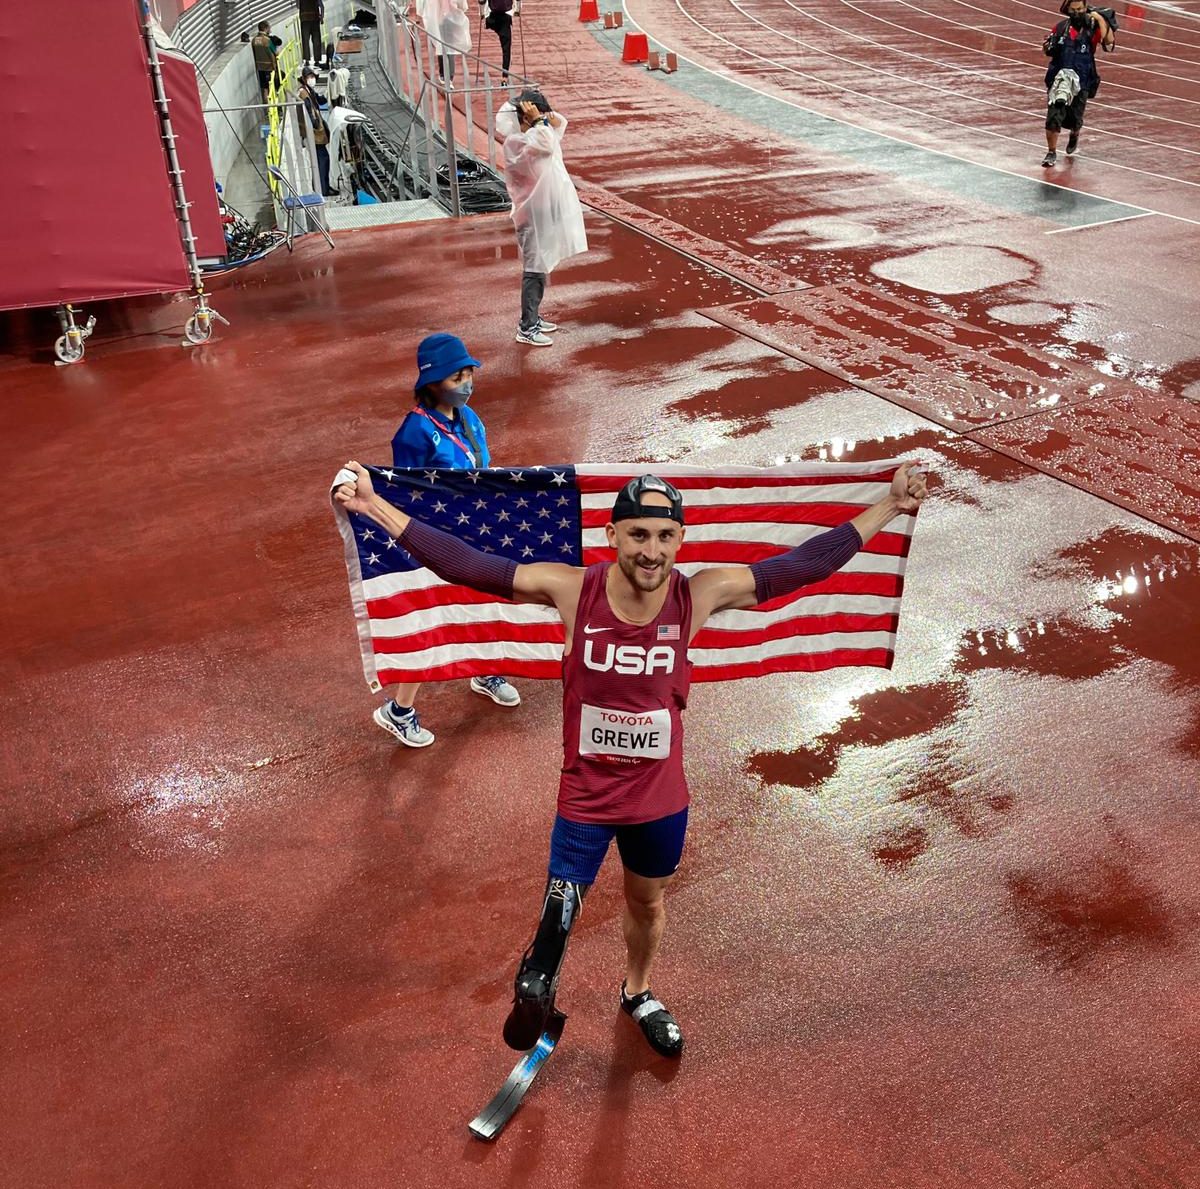 Paralympic athlete holding the American flag